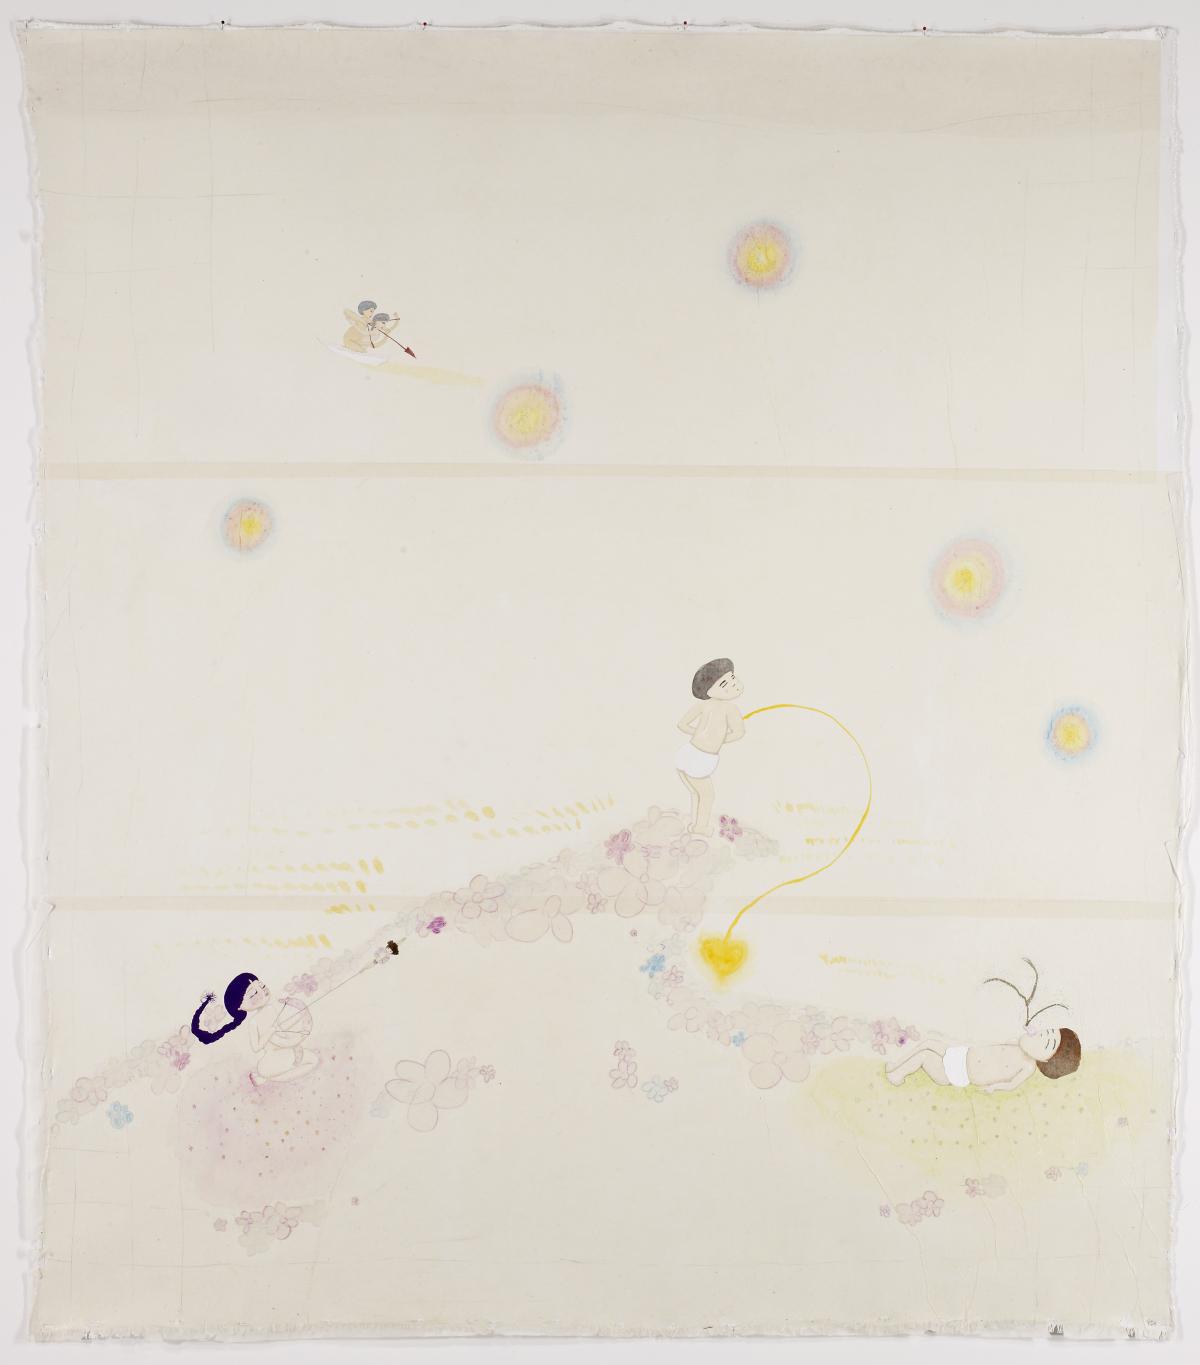 Artwork by Kyung Jeon titled Arrow Shots, 2004, Gouache, watercolor, graphite, colored pencils, ink on rice paper on canvas, 60 x 53 inches, 52.4 x 134.6 cm